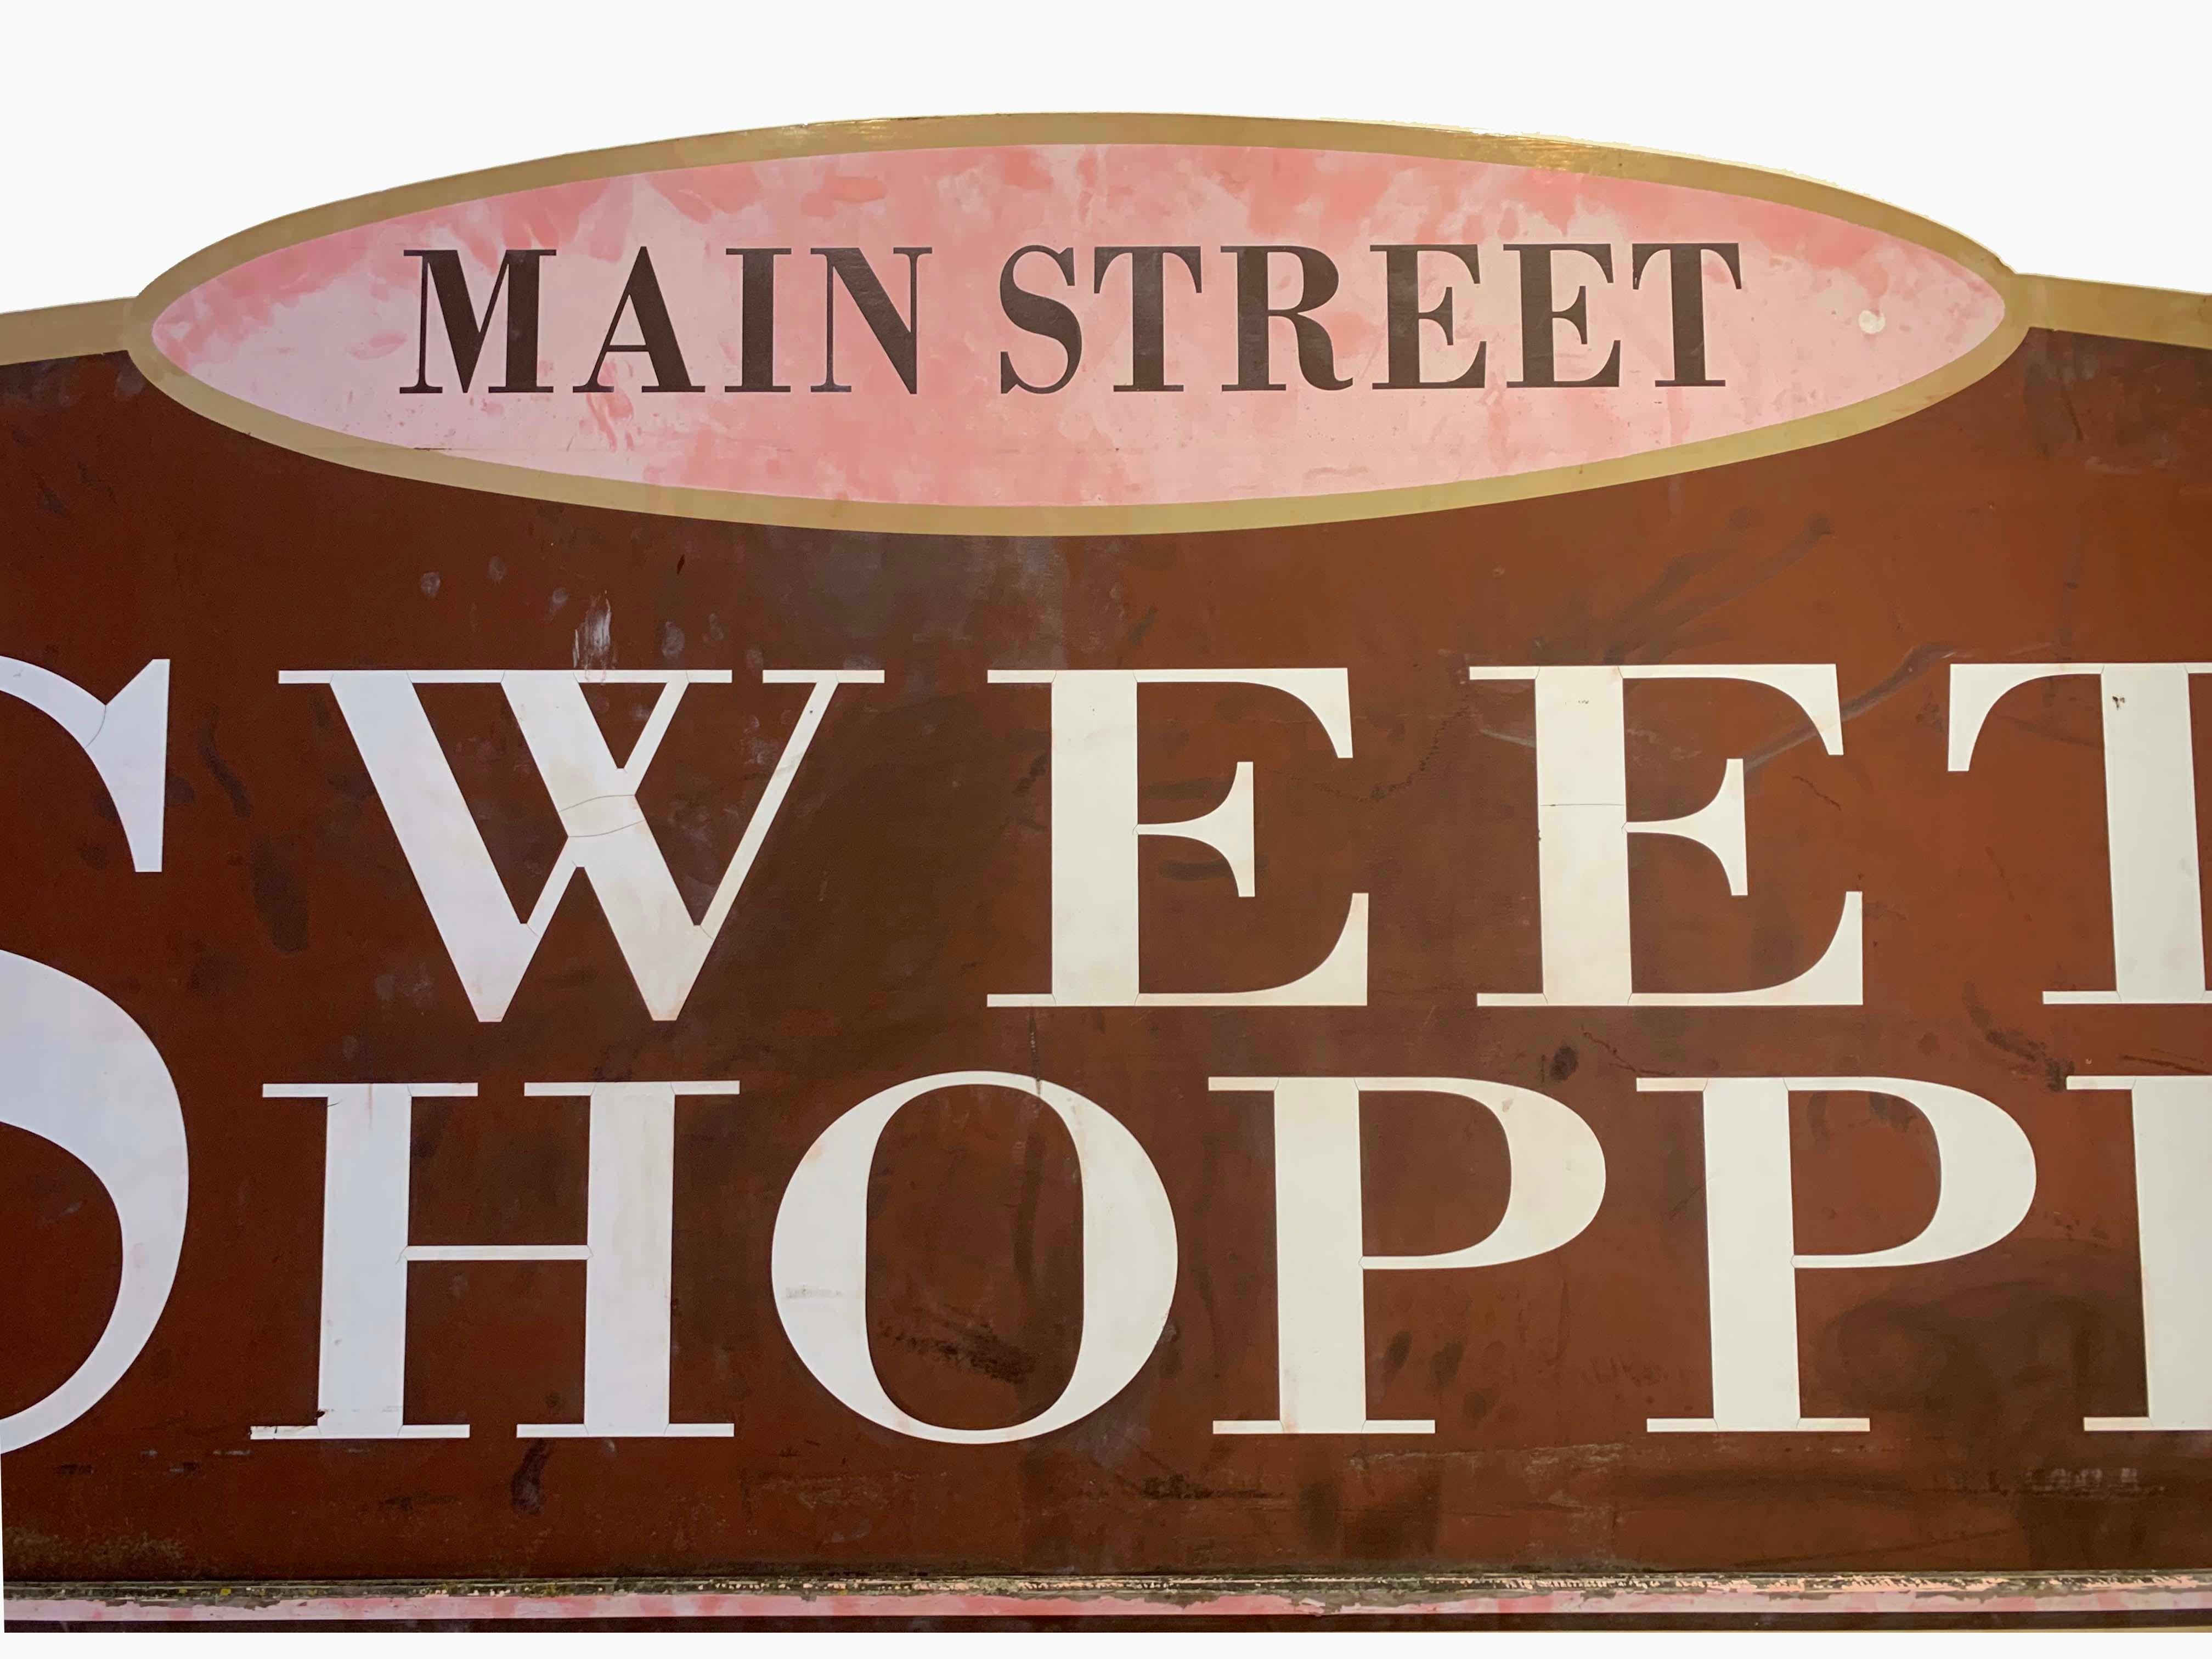 Large one of a kind wooden sign with fantastic details. Great colors and intricate shapes. Originally hung outside a CT sweet shop.